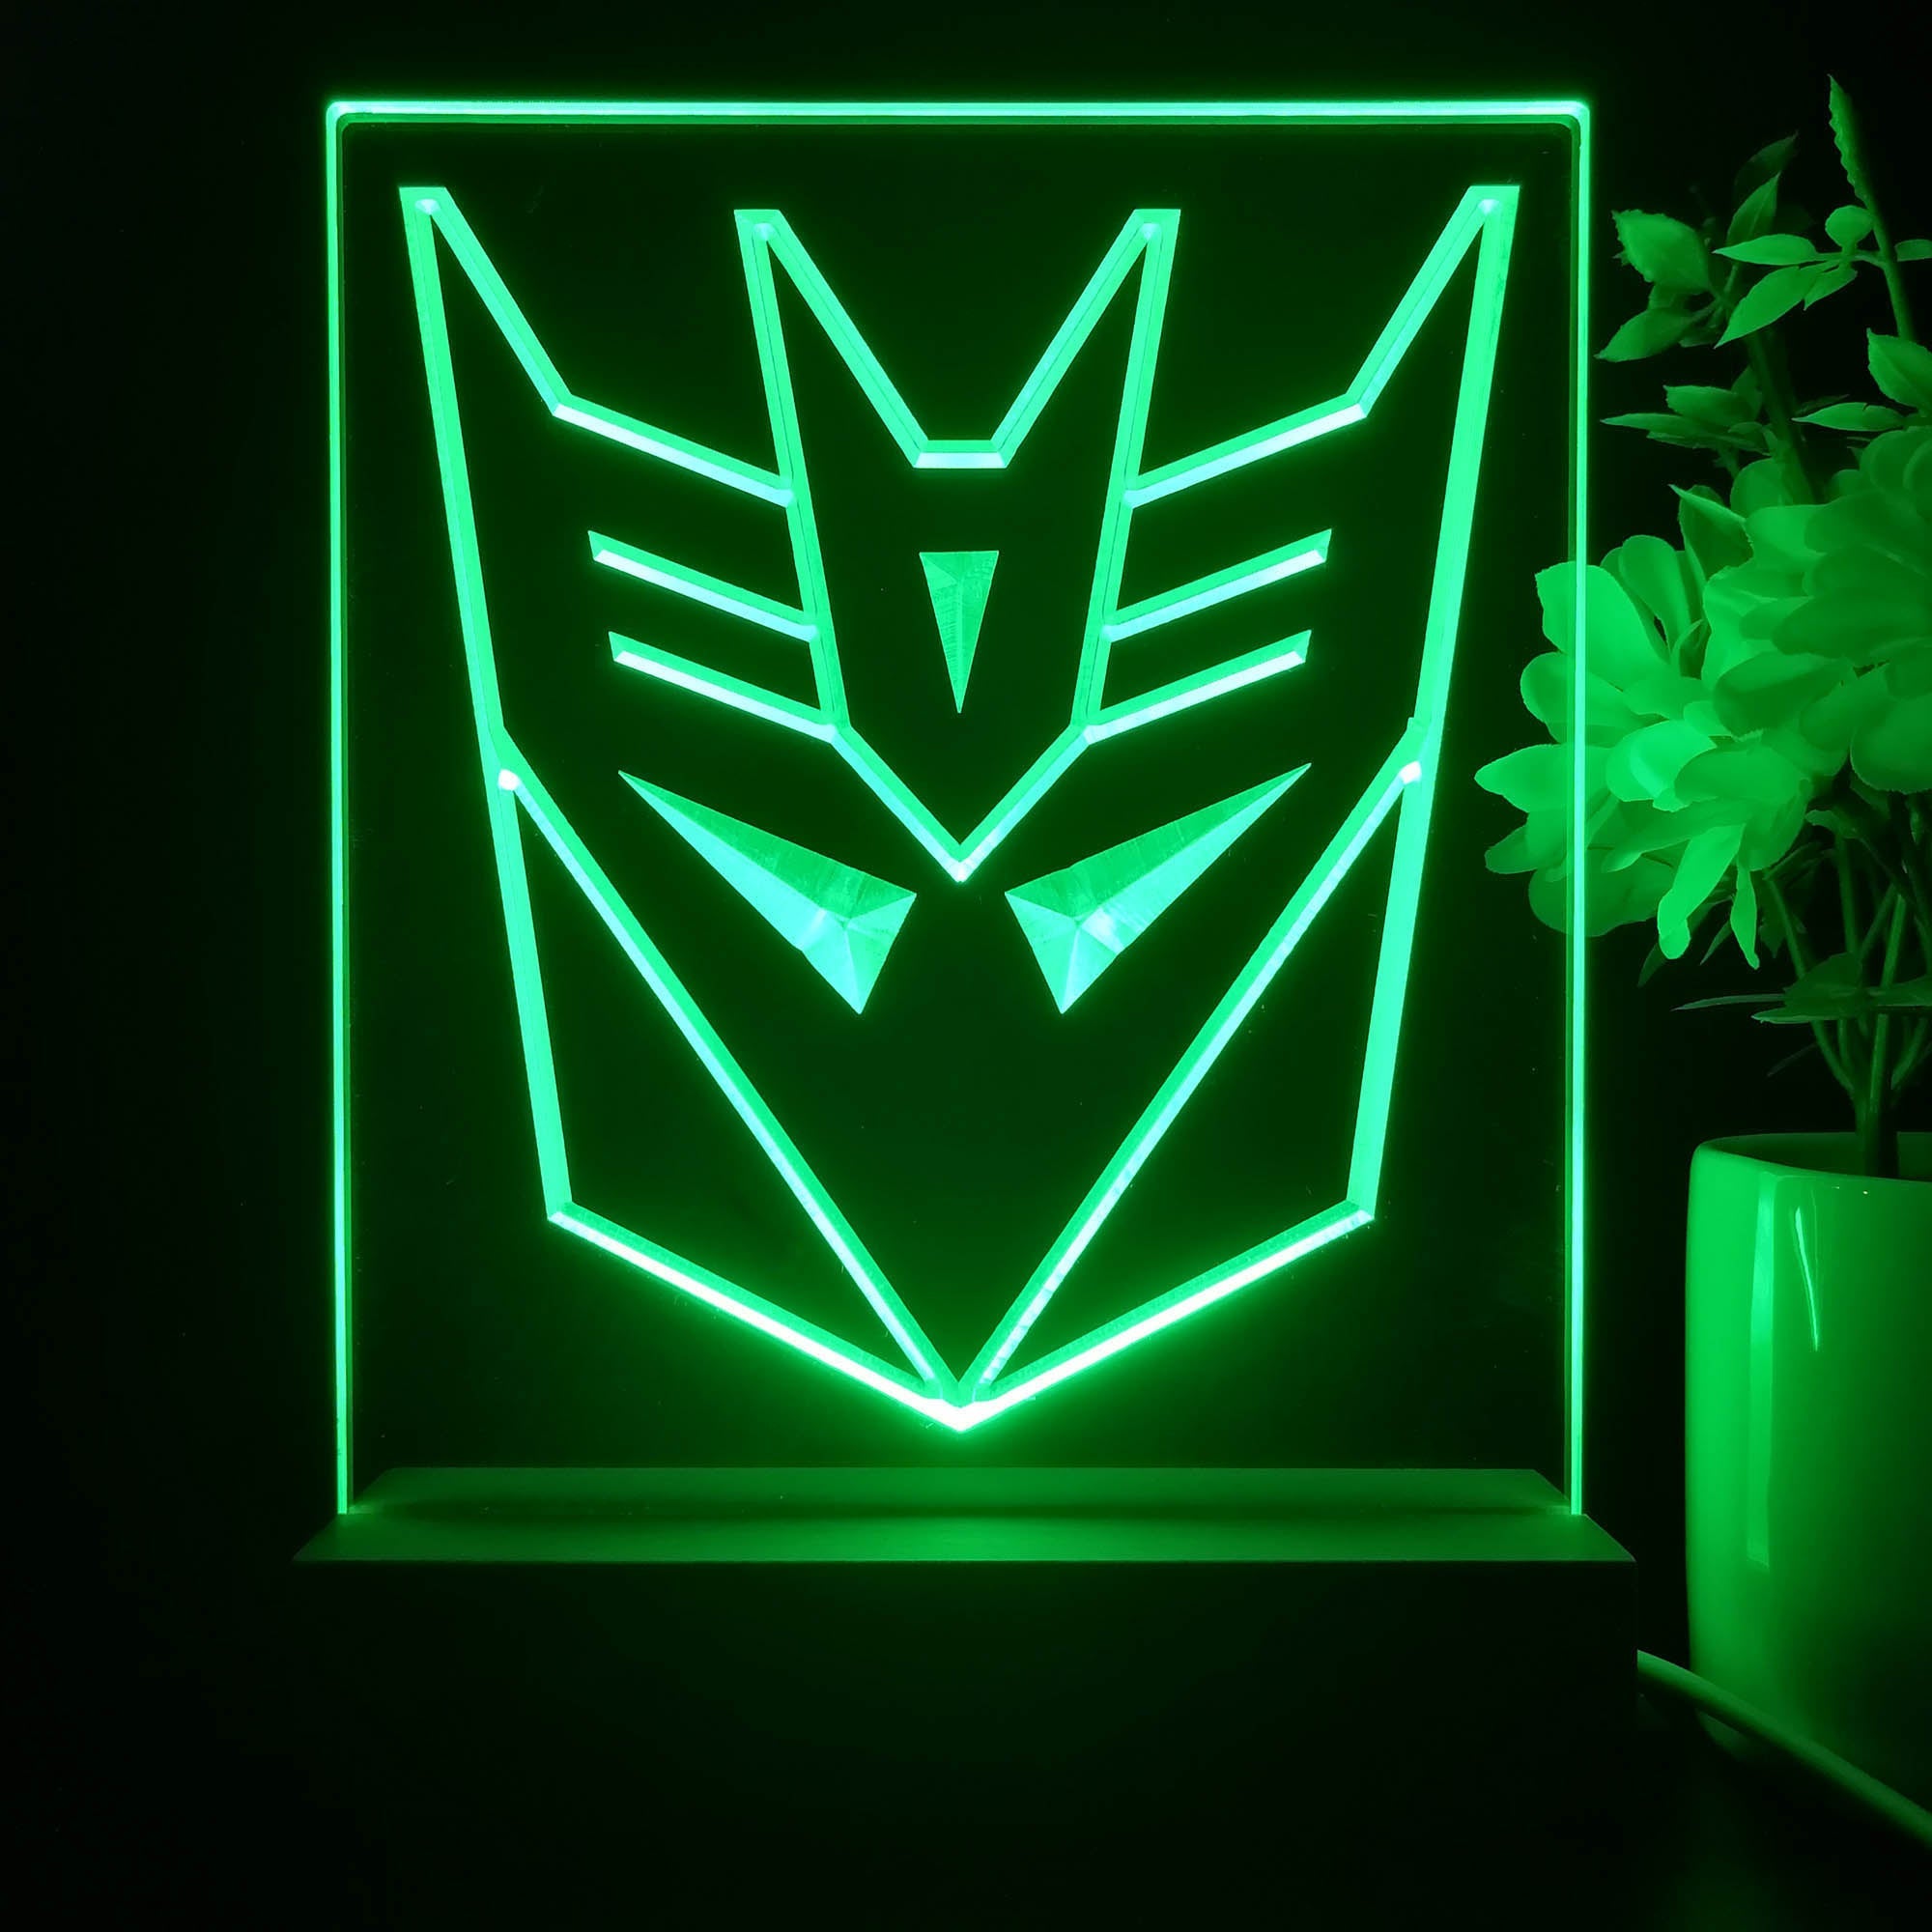 Decepticon Transformers Game Room LED Sign Lamp Display